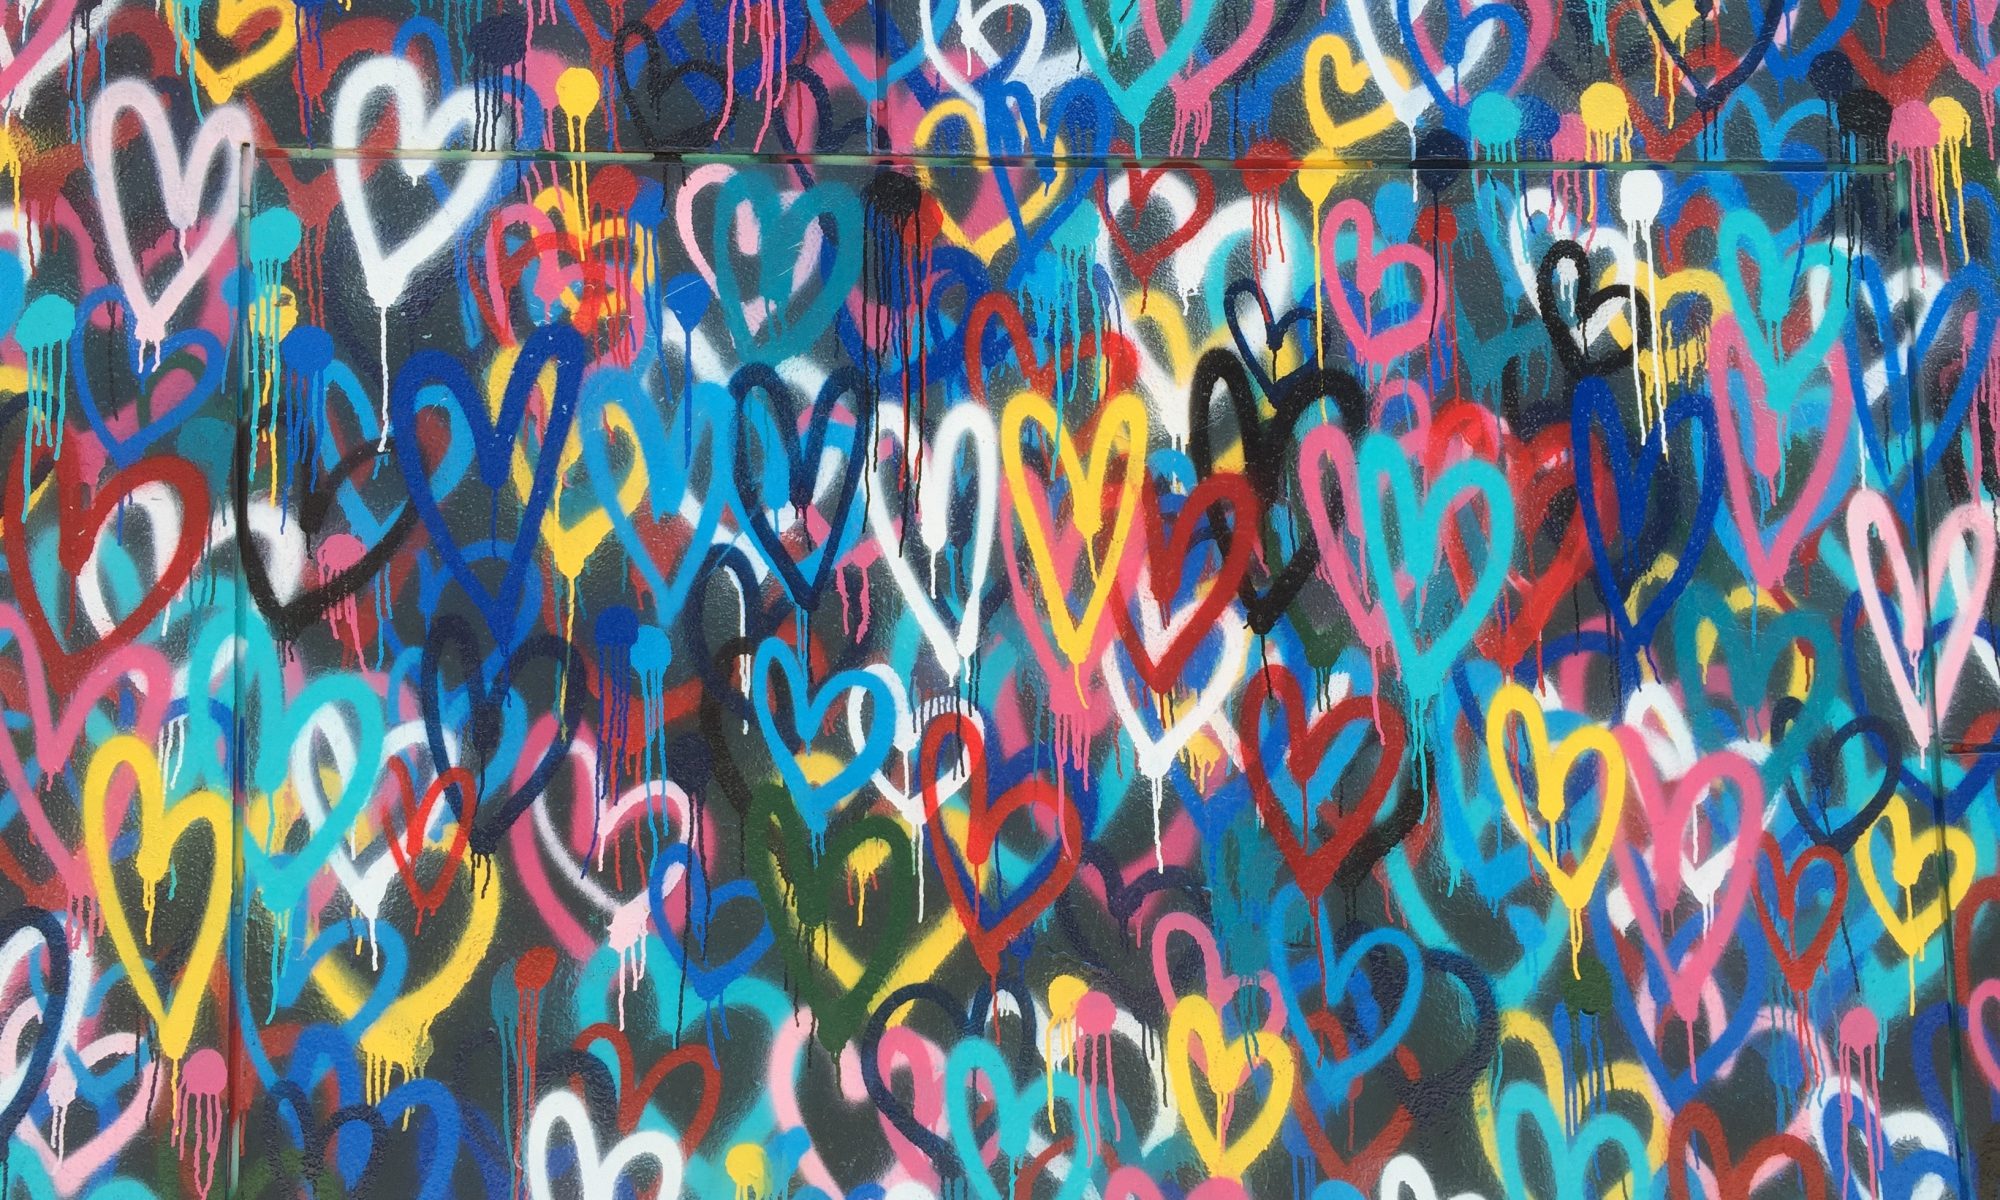 Wall of colour spray-painted hearts_Photo by Renee Fisher on Unsplash